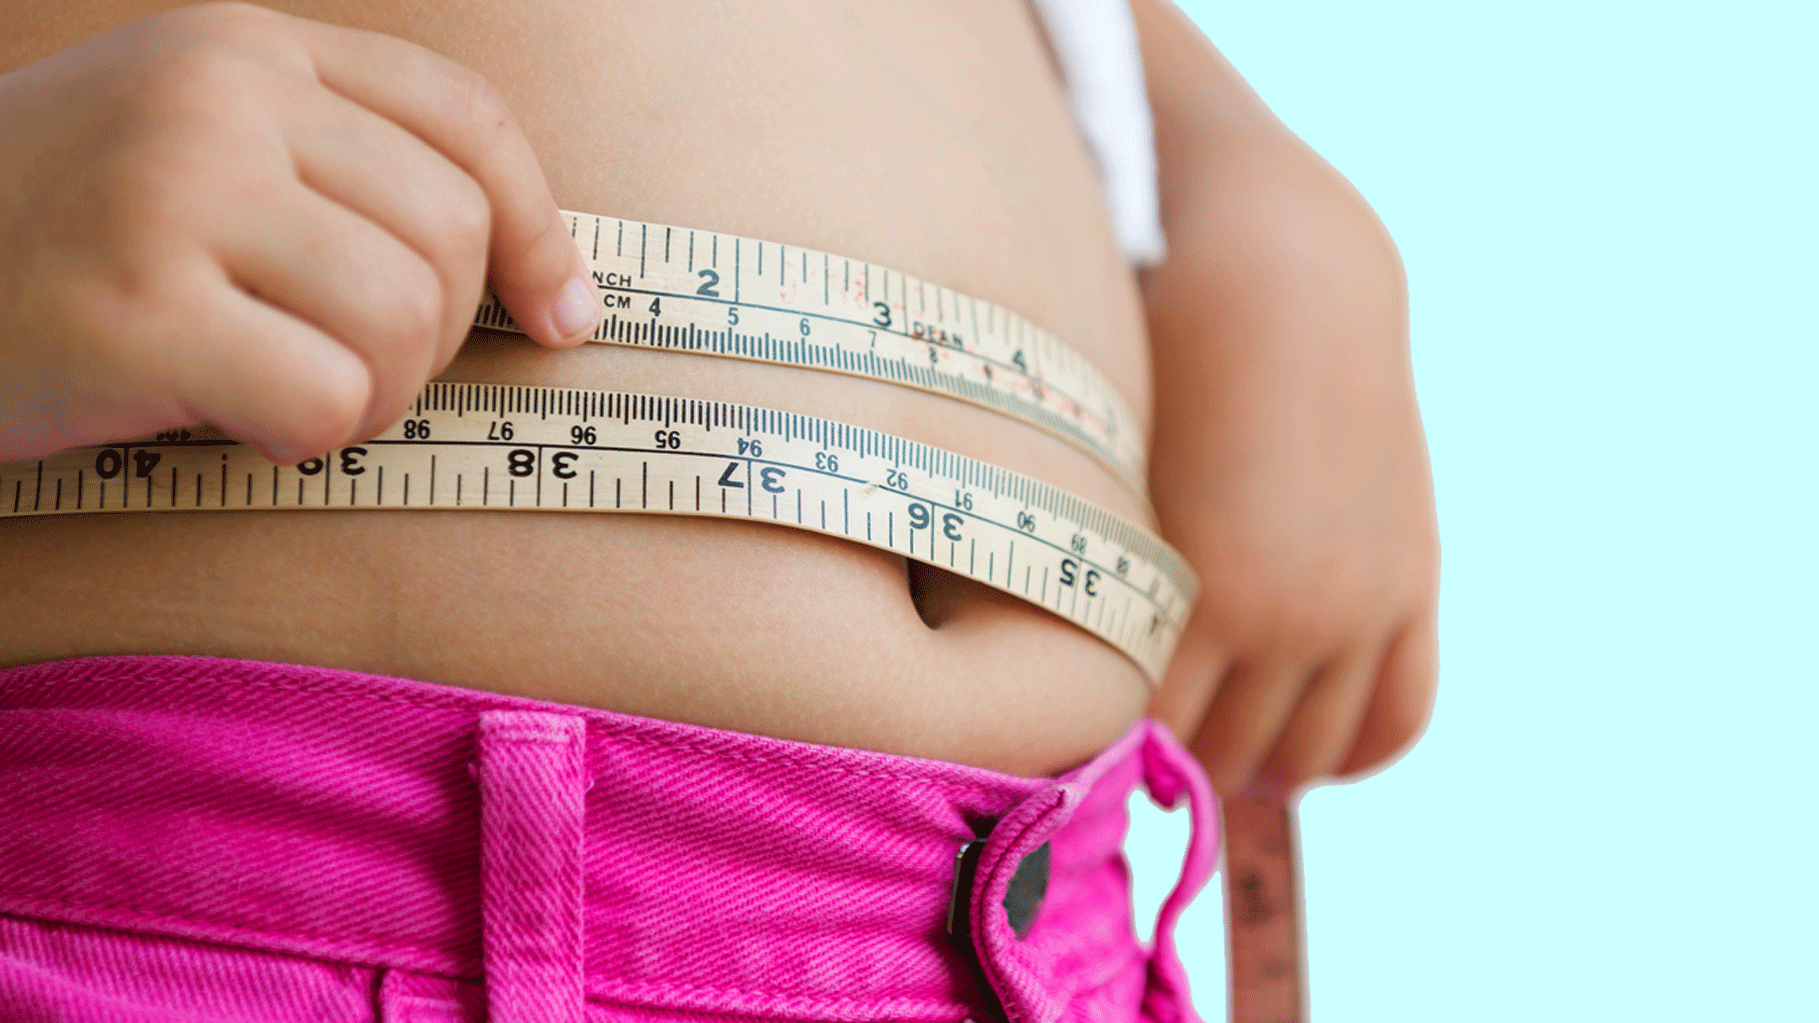 Adult obesity is defined as having a body mass index (BMI) higher than 30. Two in three women in metros and every eighth woman in Indian villages are overweight or obese.&nbsp;